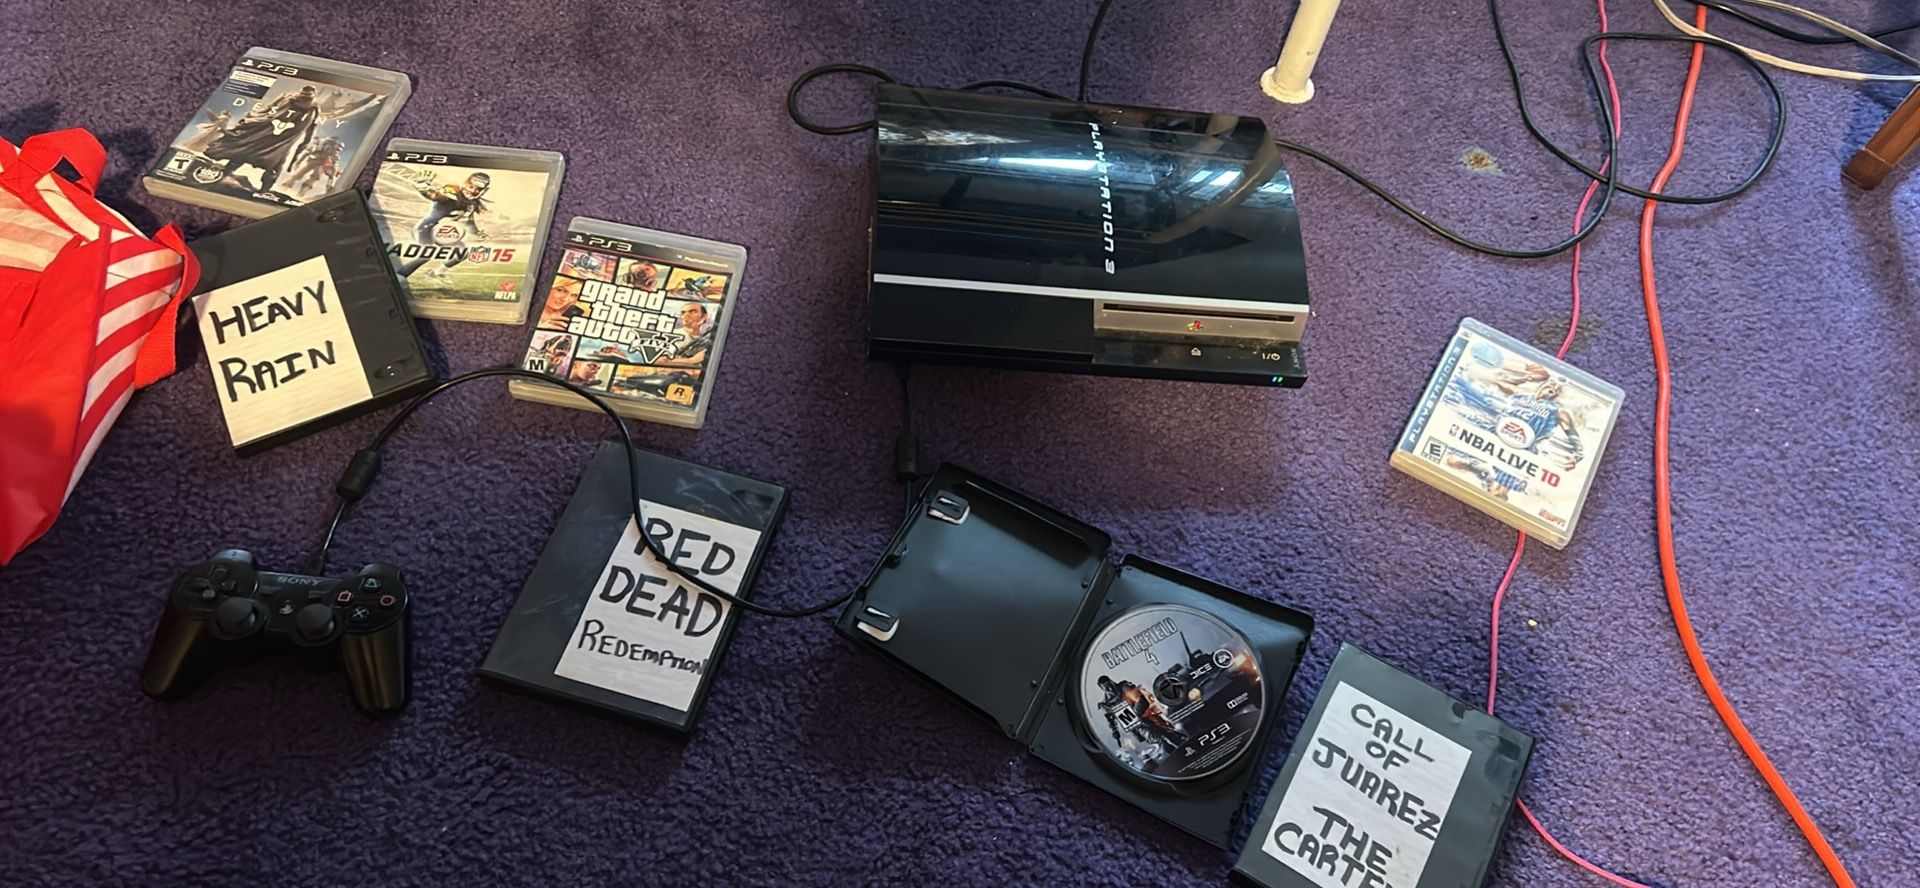 PS3 Bundle With Projector